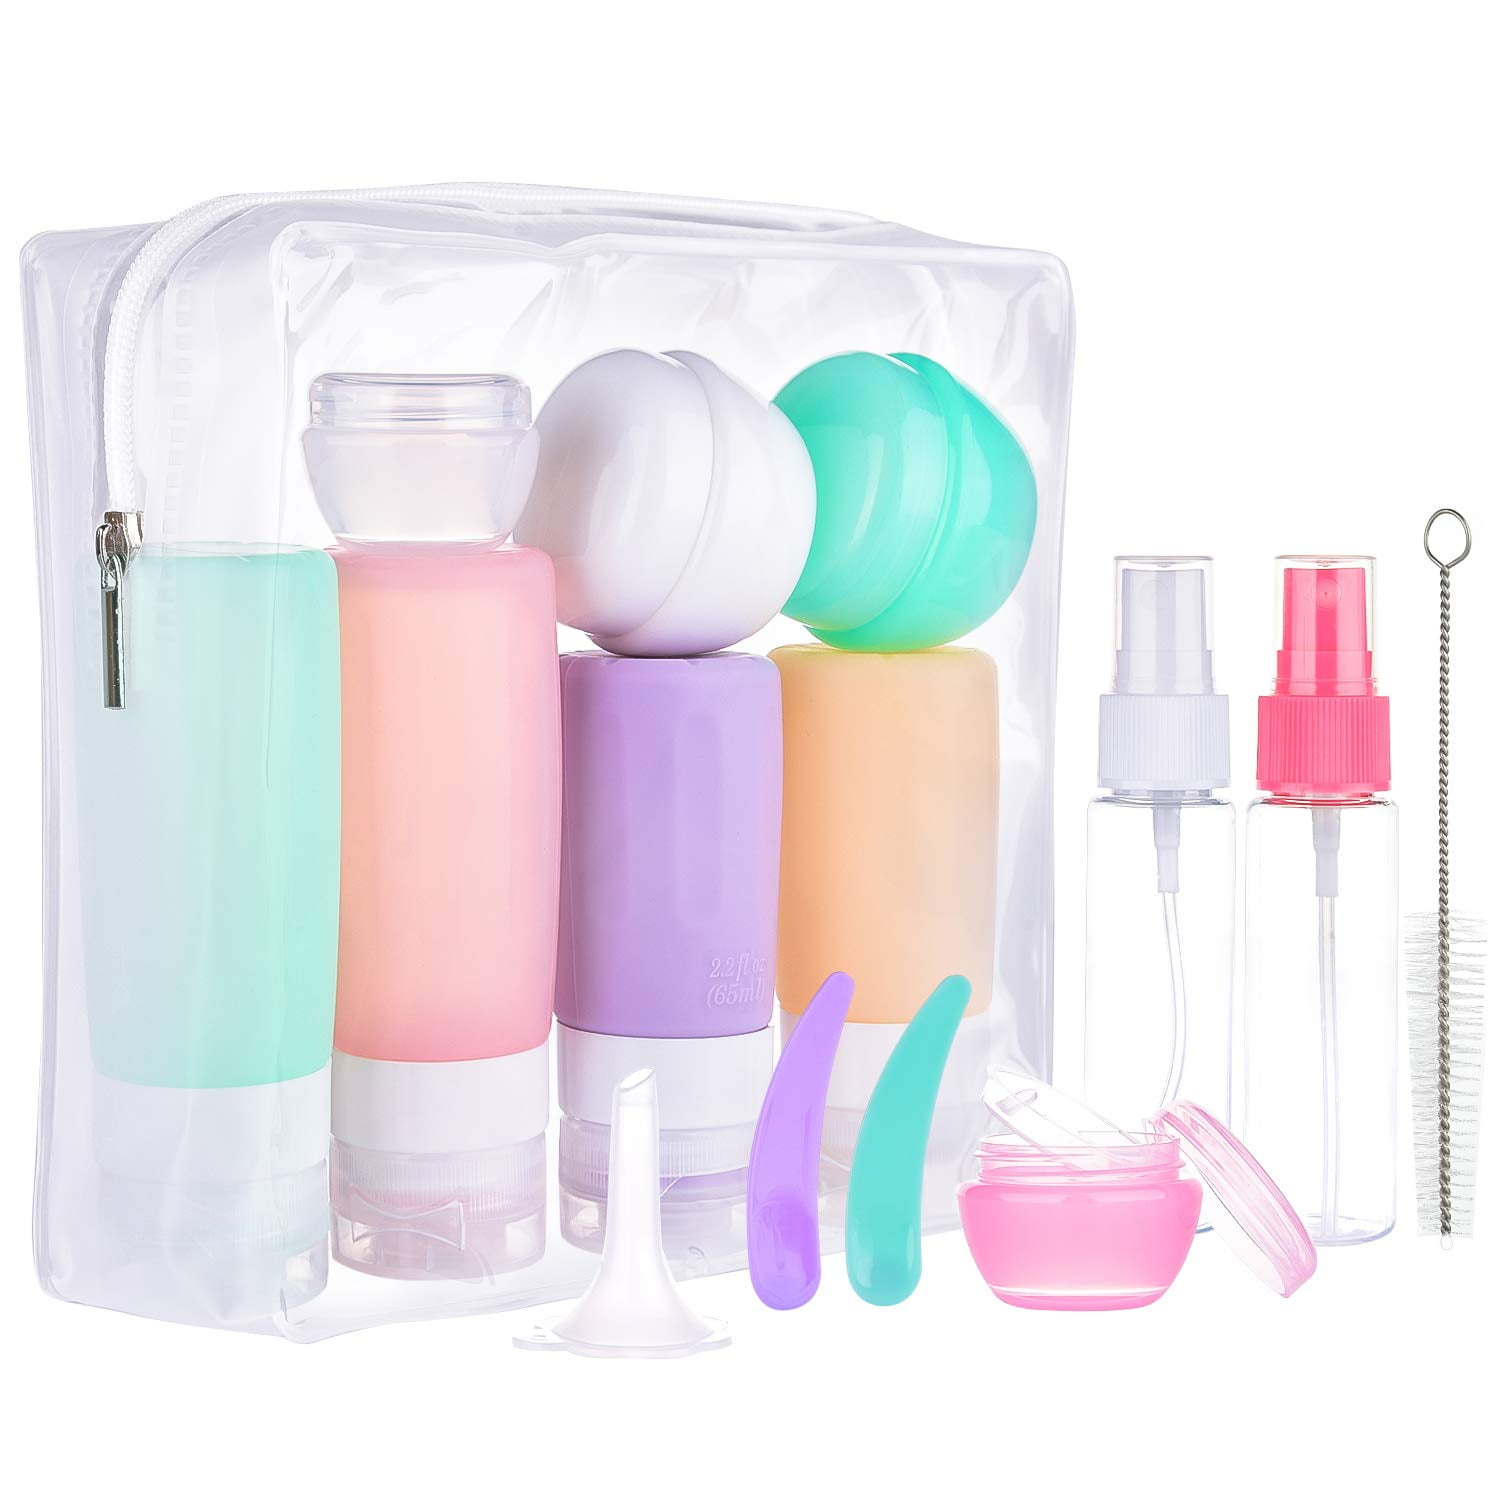 Travel Size Bottles for 3-1-1 Toiletries with TSA Approved Cosmetic To –